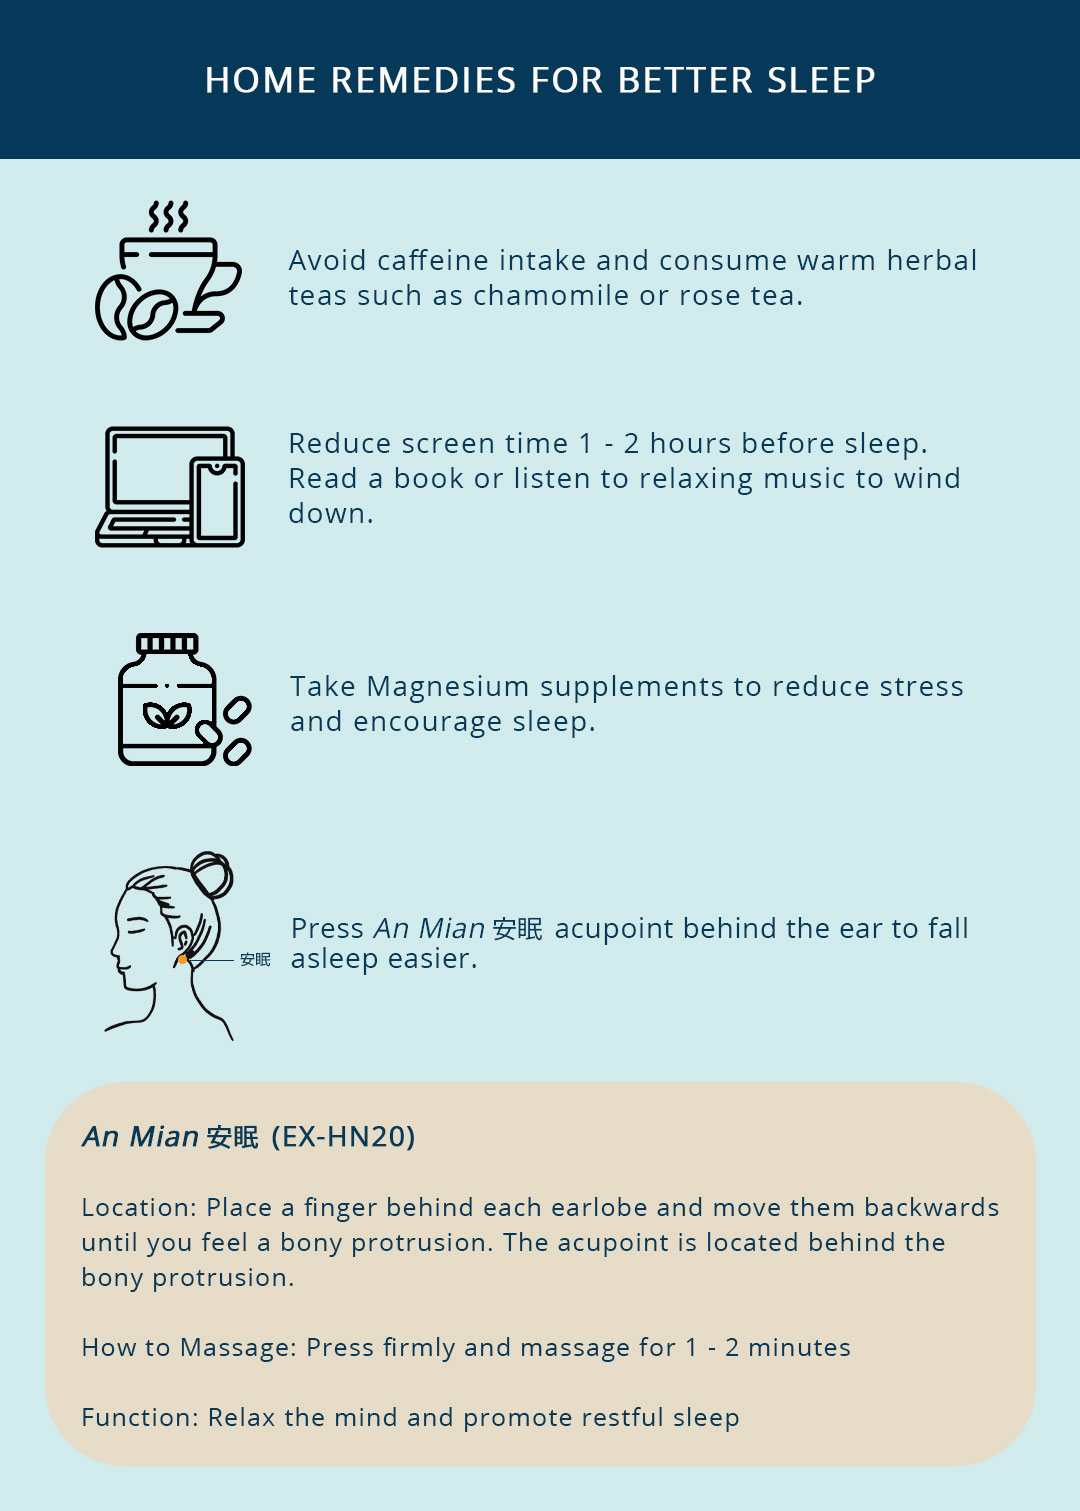 Home Remedies for better sleep